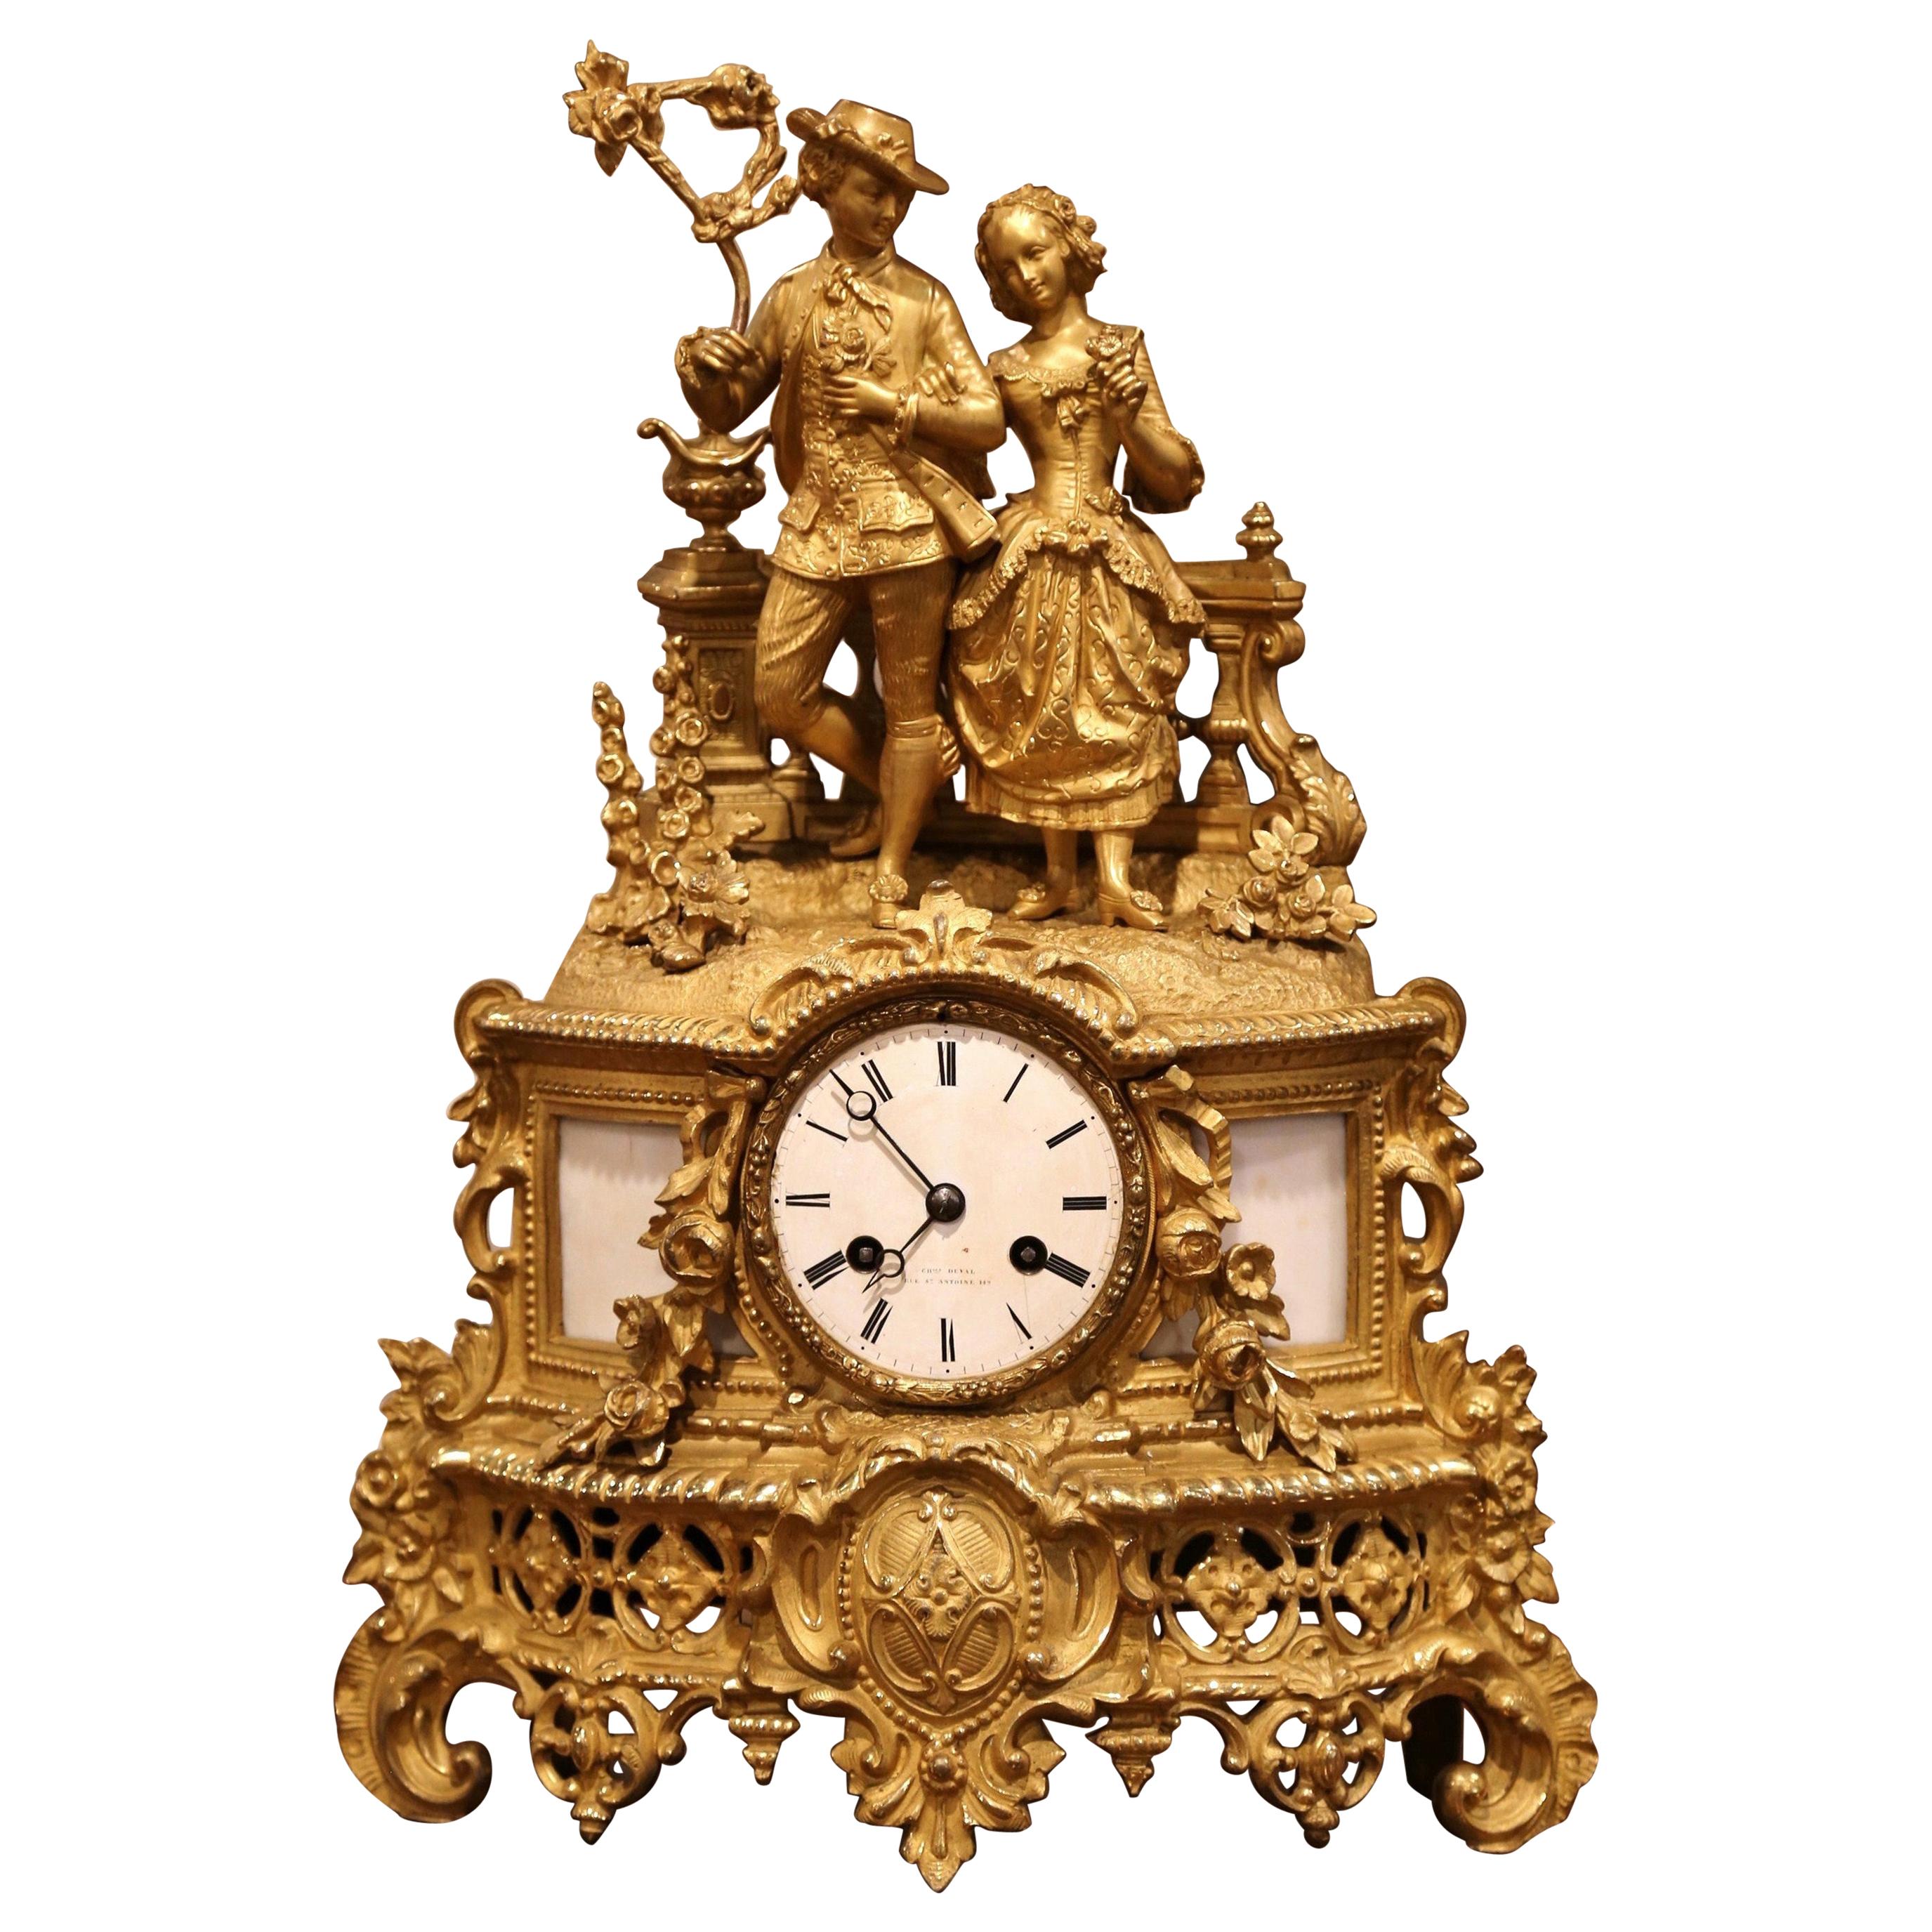 19th Century French Louis XV Gilt Bronze and White Marble Mantel Clock